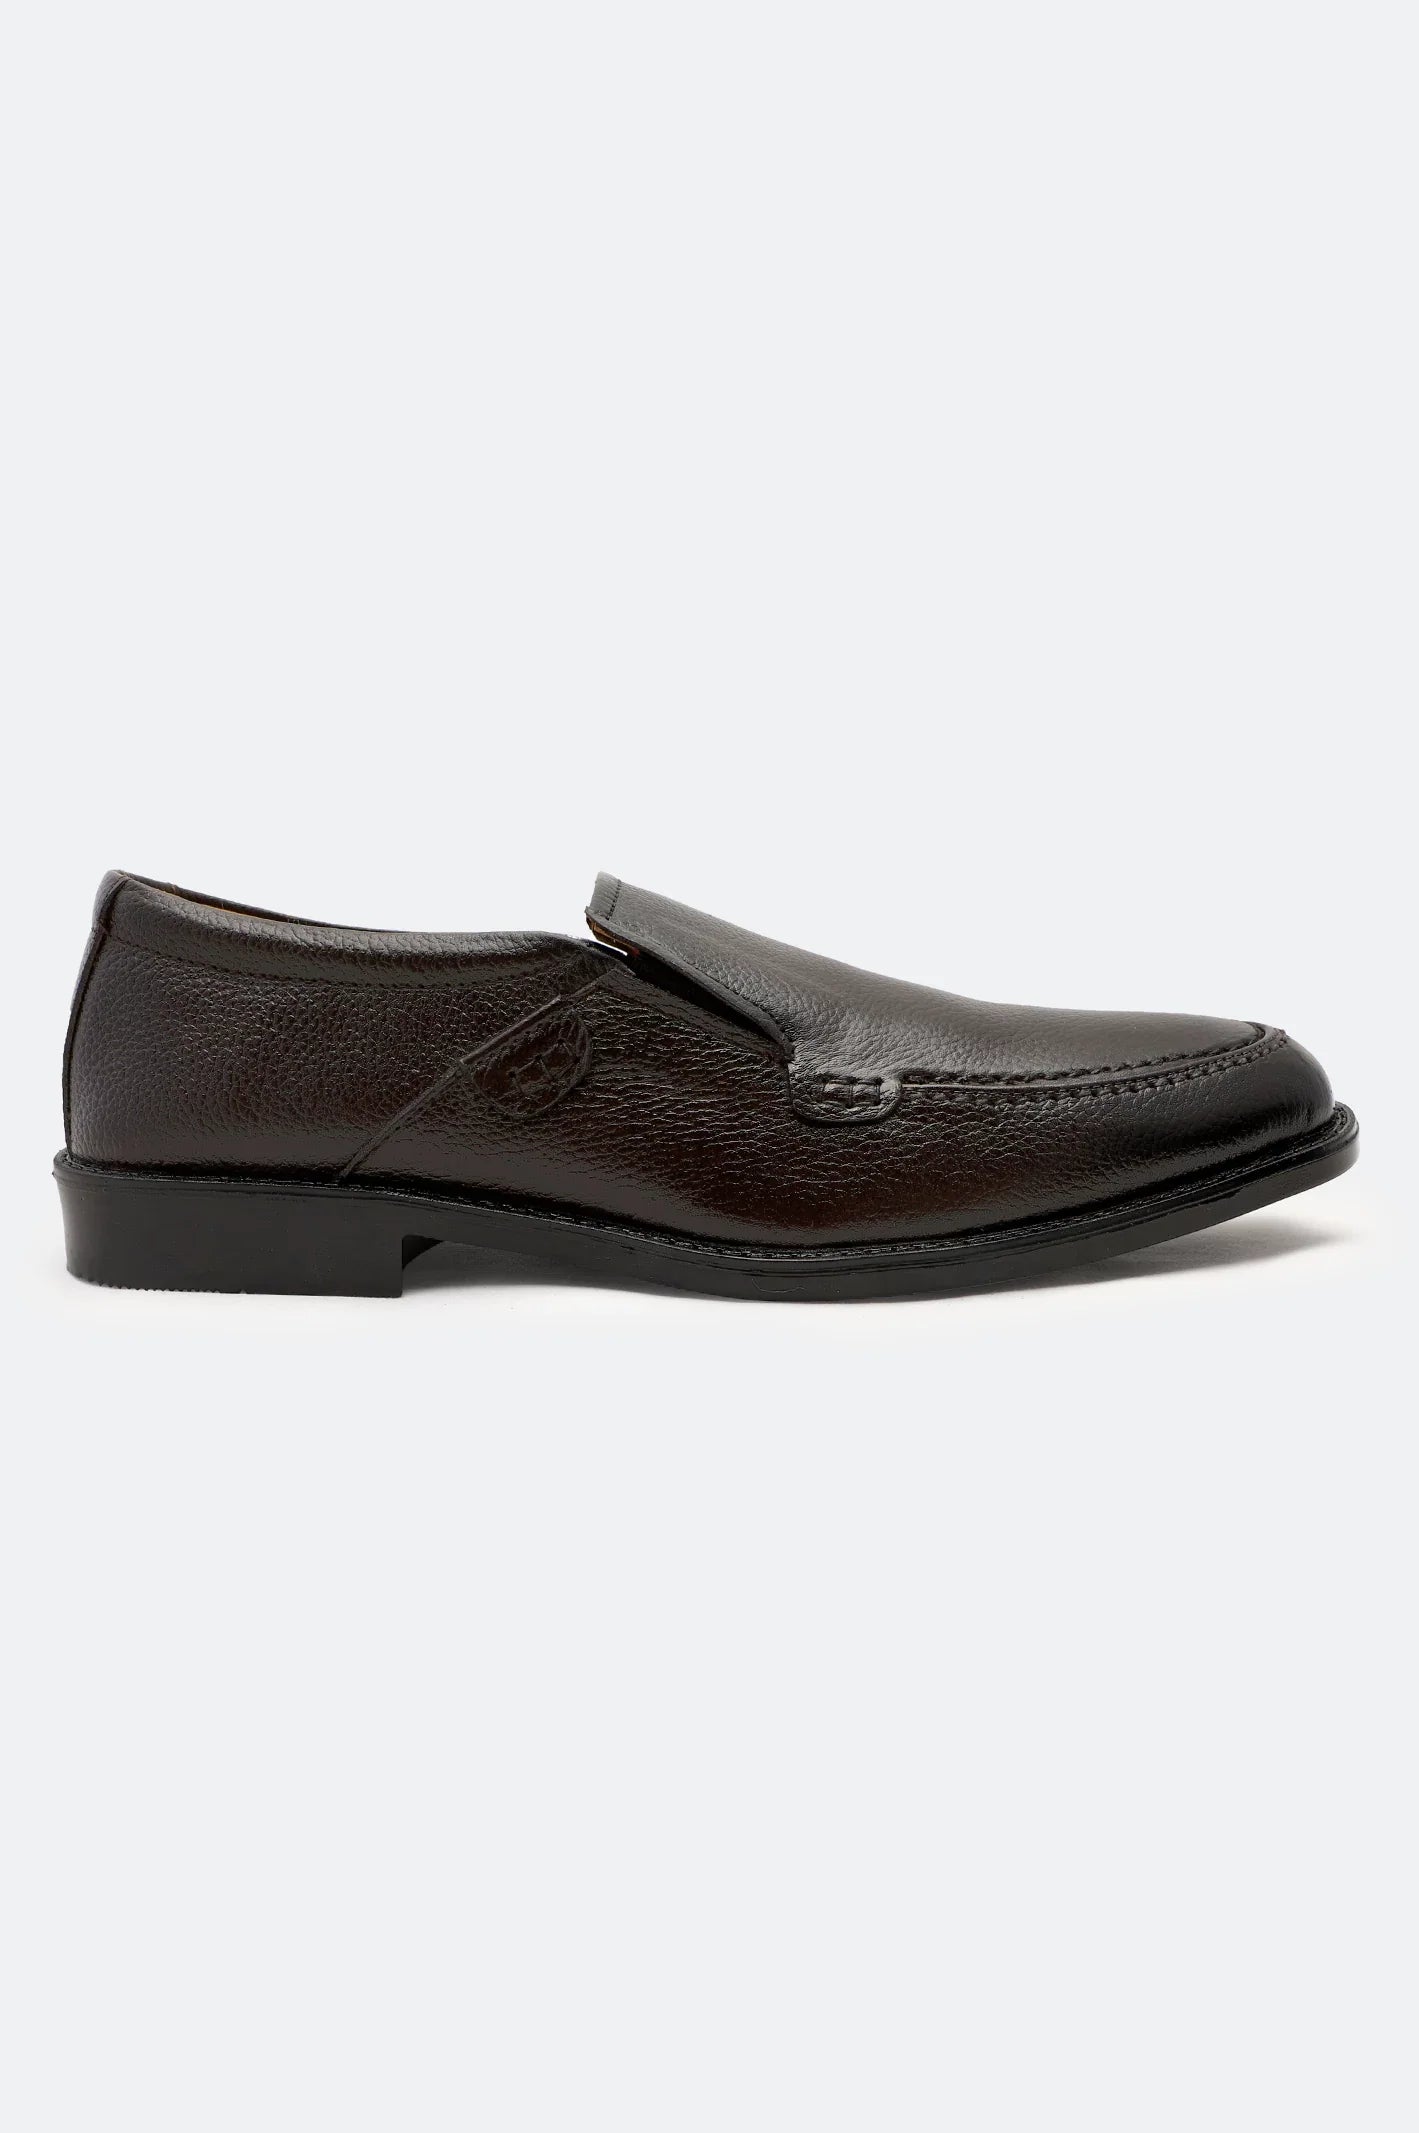 Brown Formal Moccasins Shoes From French Emporio By Diners